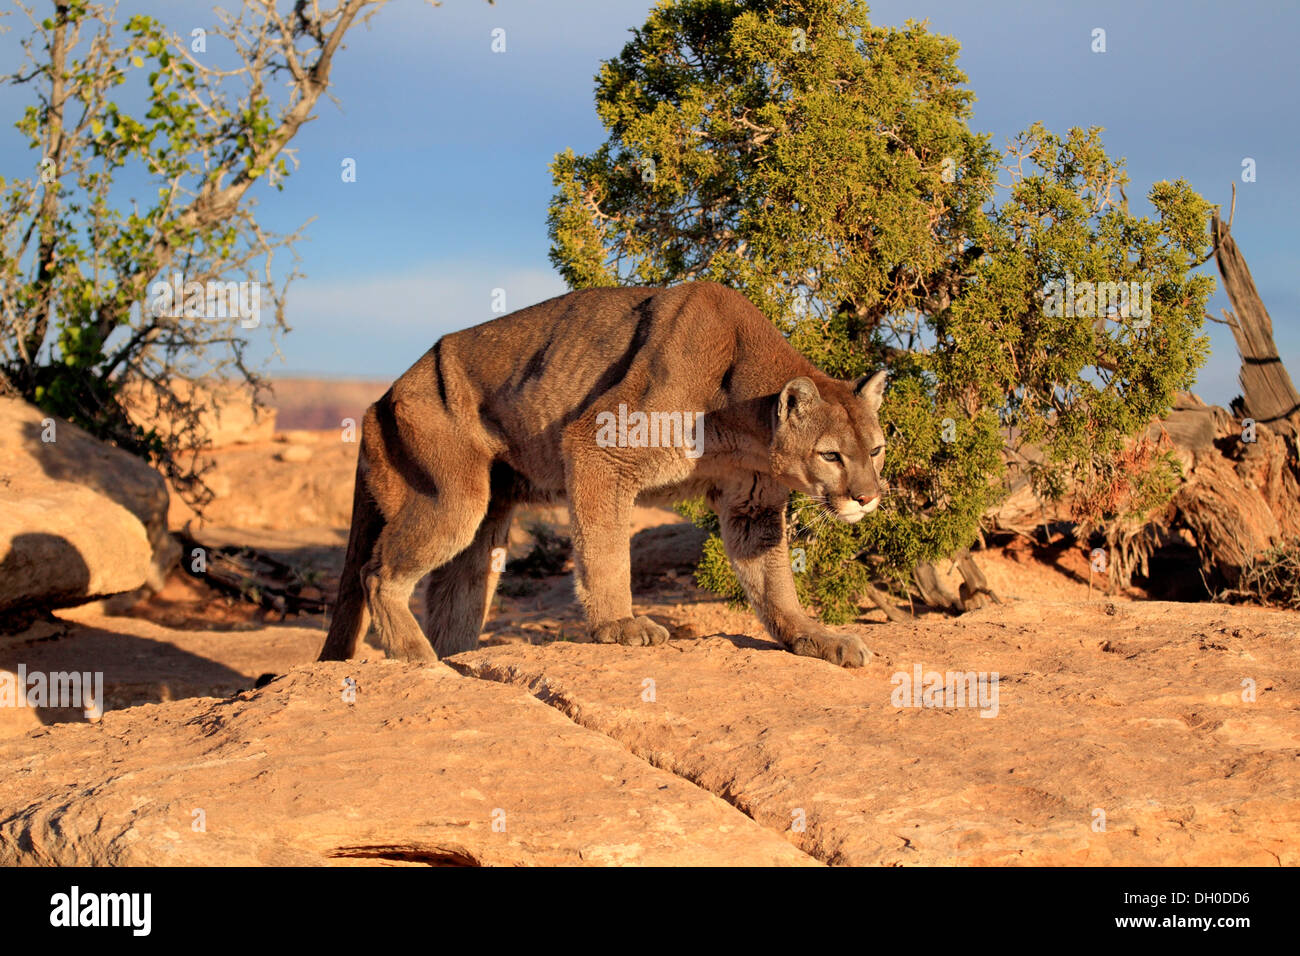 Cougar, Puma or Mountain Lion (Puma concolor), searching for prey, stalking, Utah, United States Stock Photo